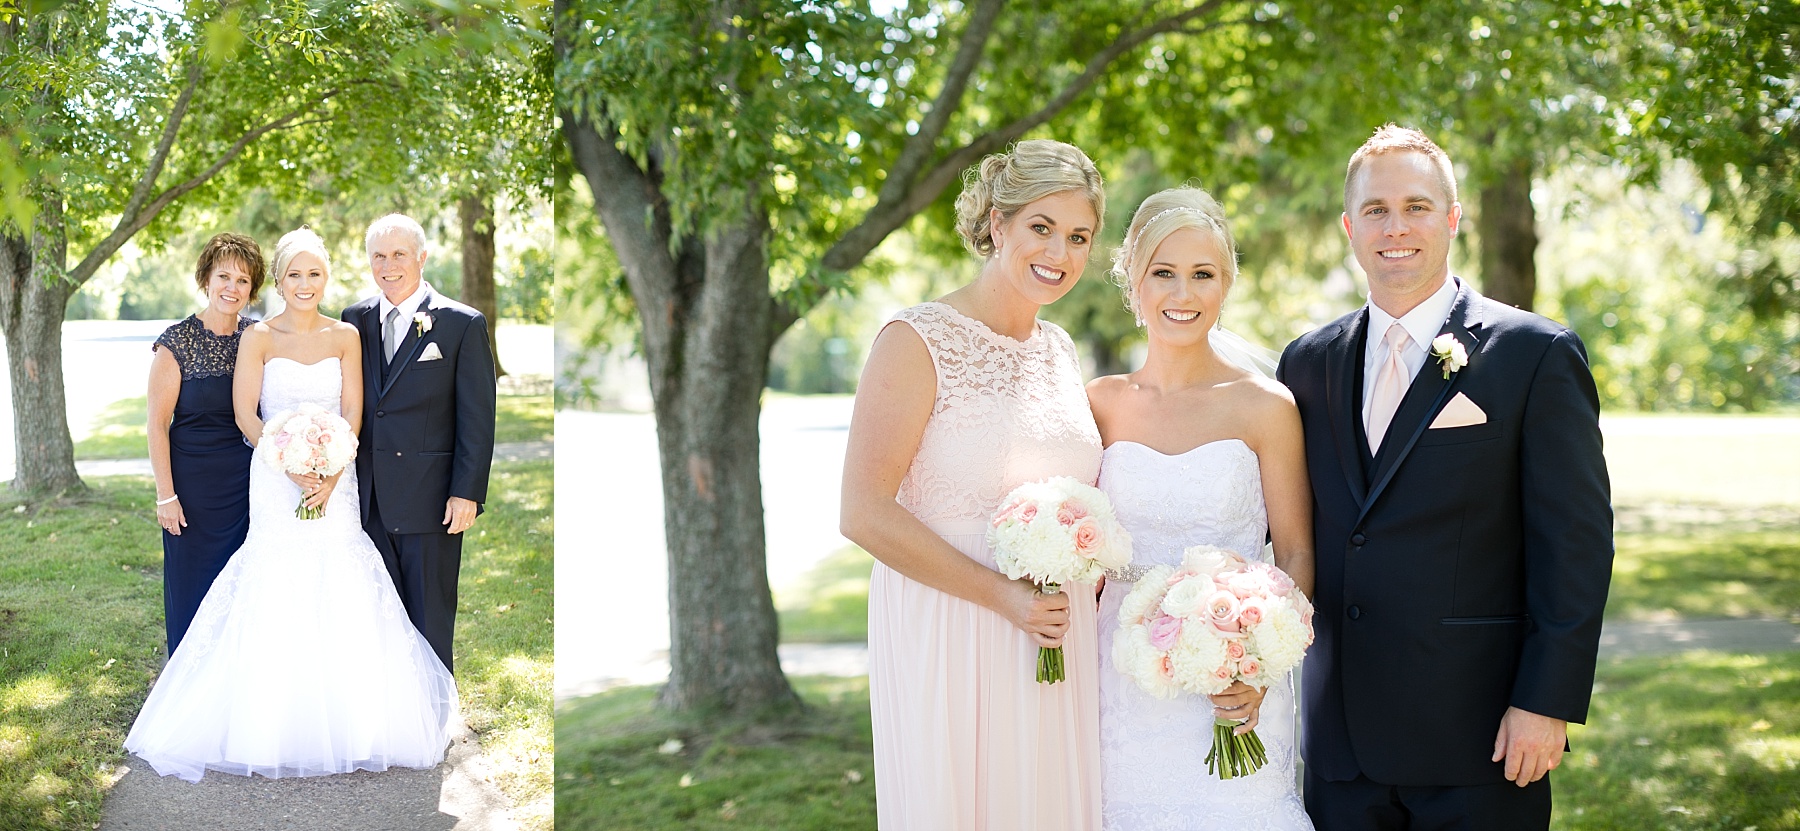 Tiffany & Kyle's perfect September day for their Lake Holcombe wedding at Eastbay Lodge was stunning.